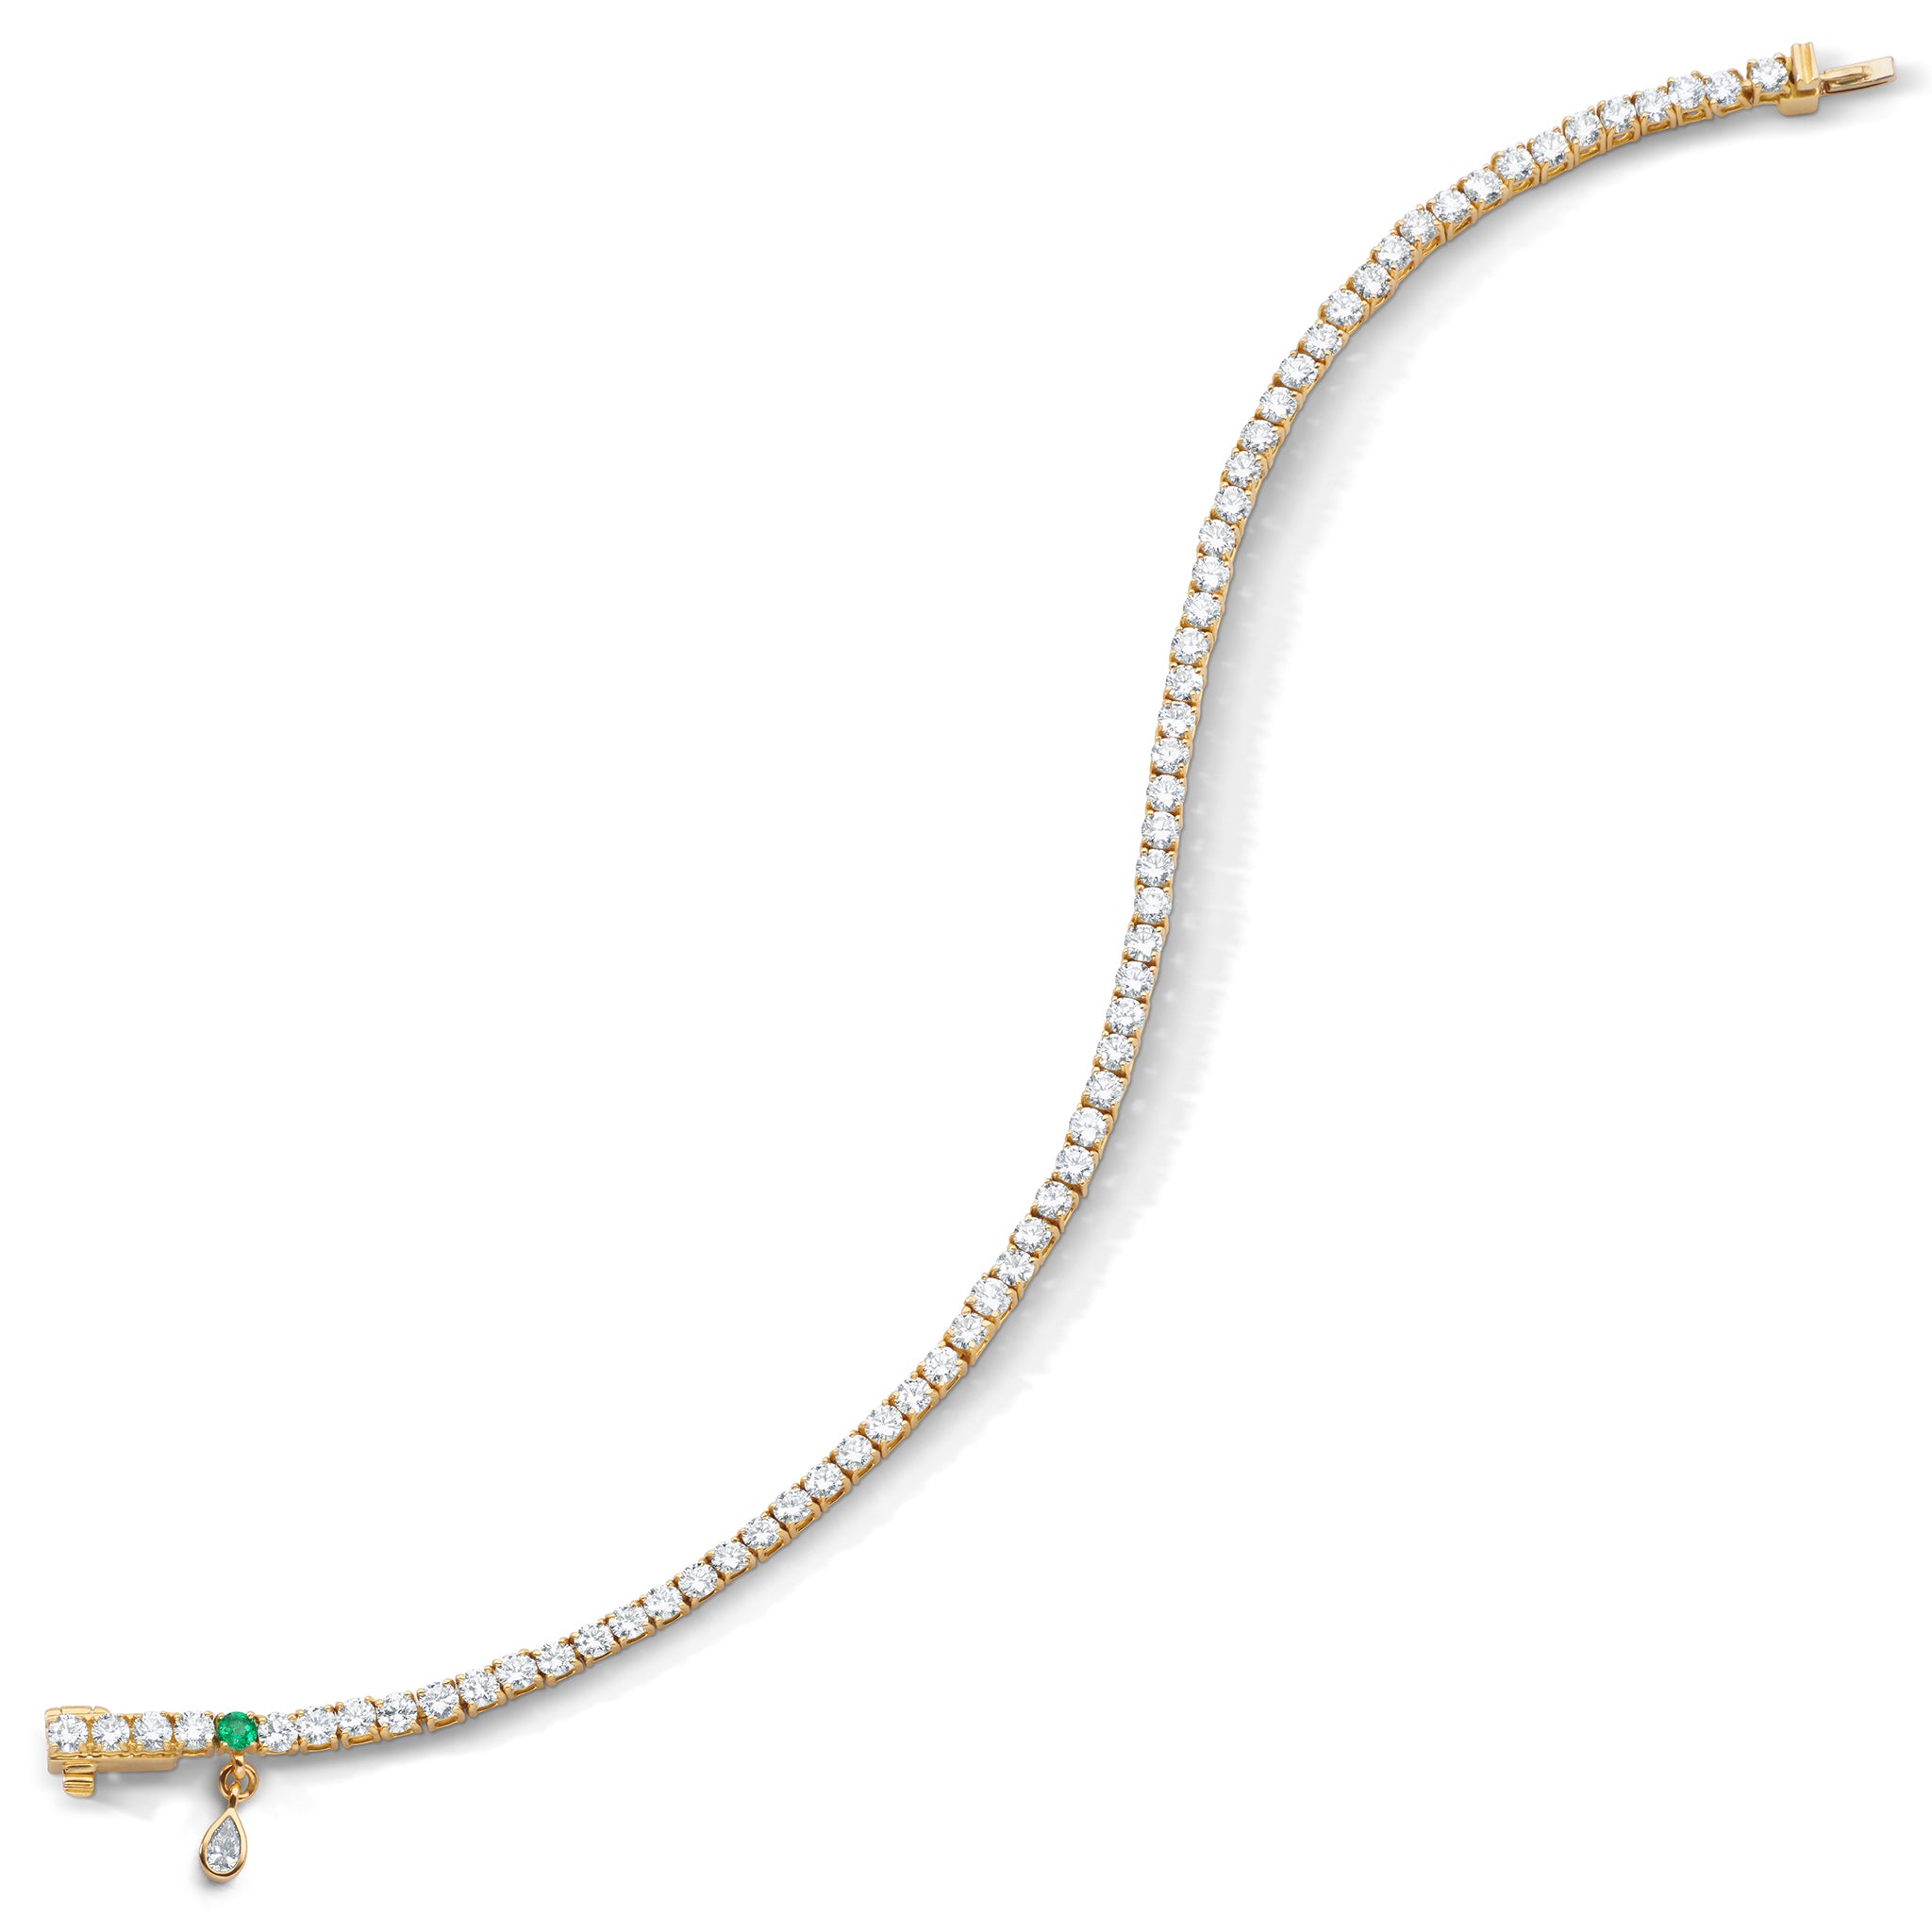 Level Up Tennis Bracelet | Local Eclectic – local eclectic